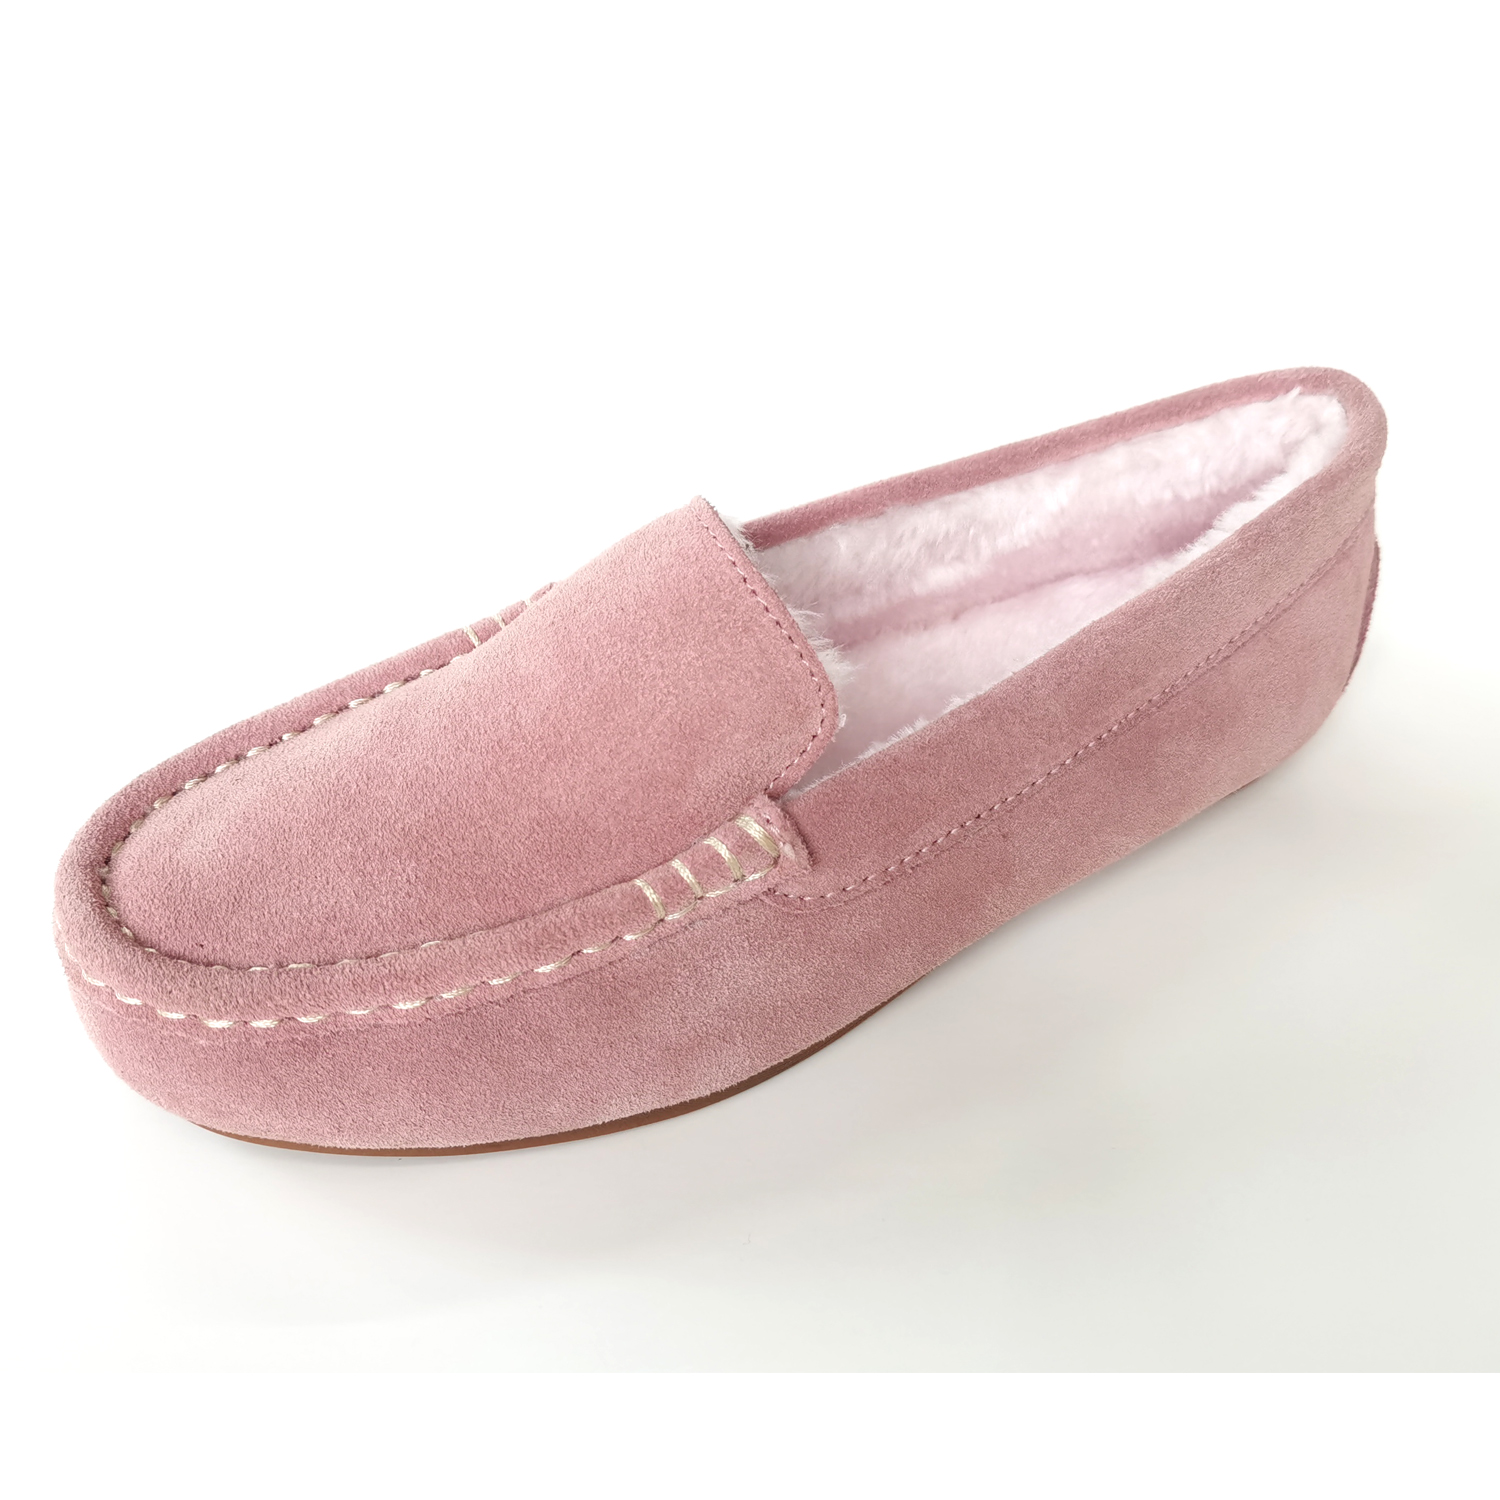 Trendy Slip On Shoes for a Casual and Stylish Look